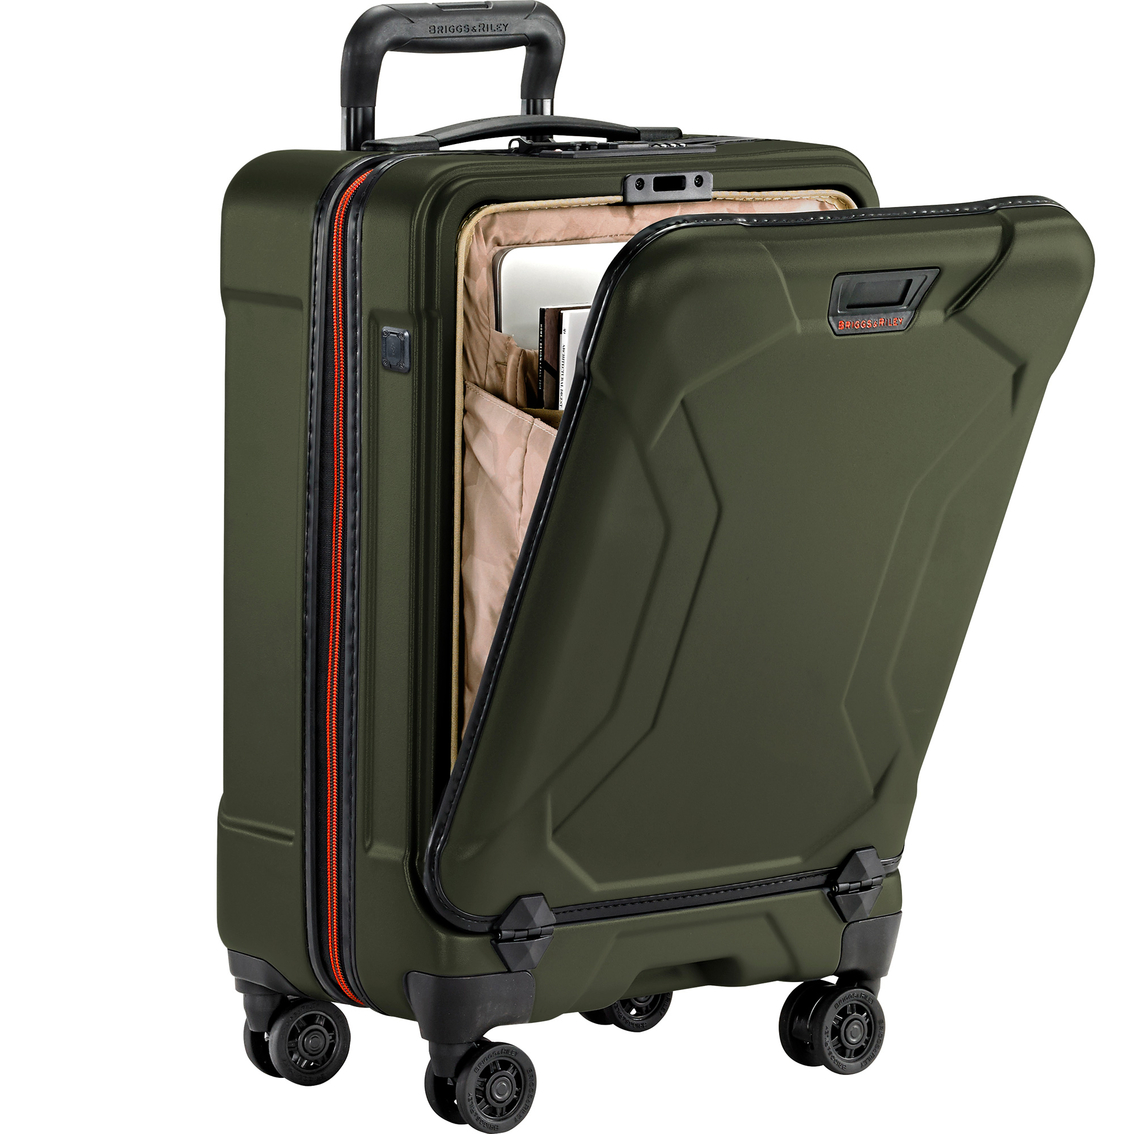 Briggs & Riley Torq 21 in. International Carry-On Spinner - Image 6 of 10